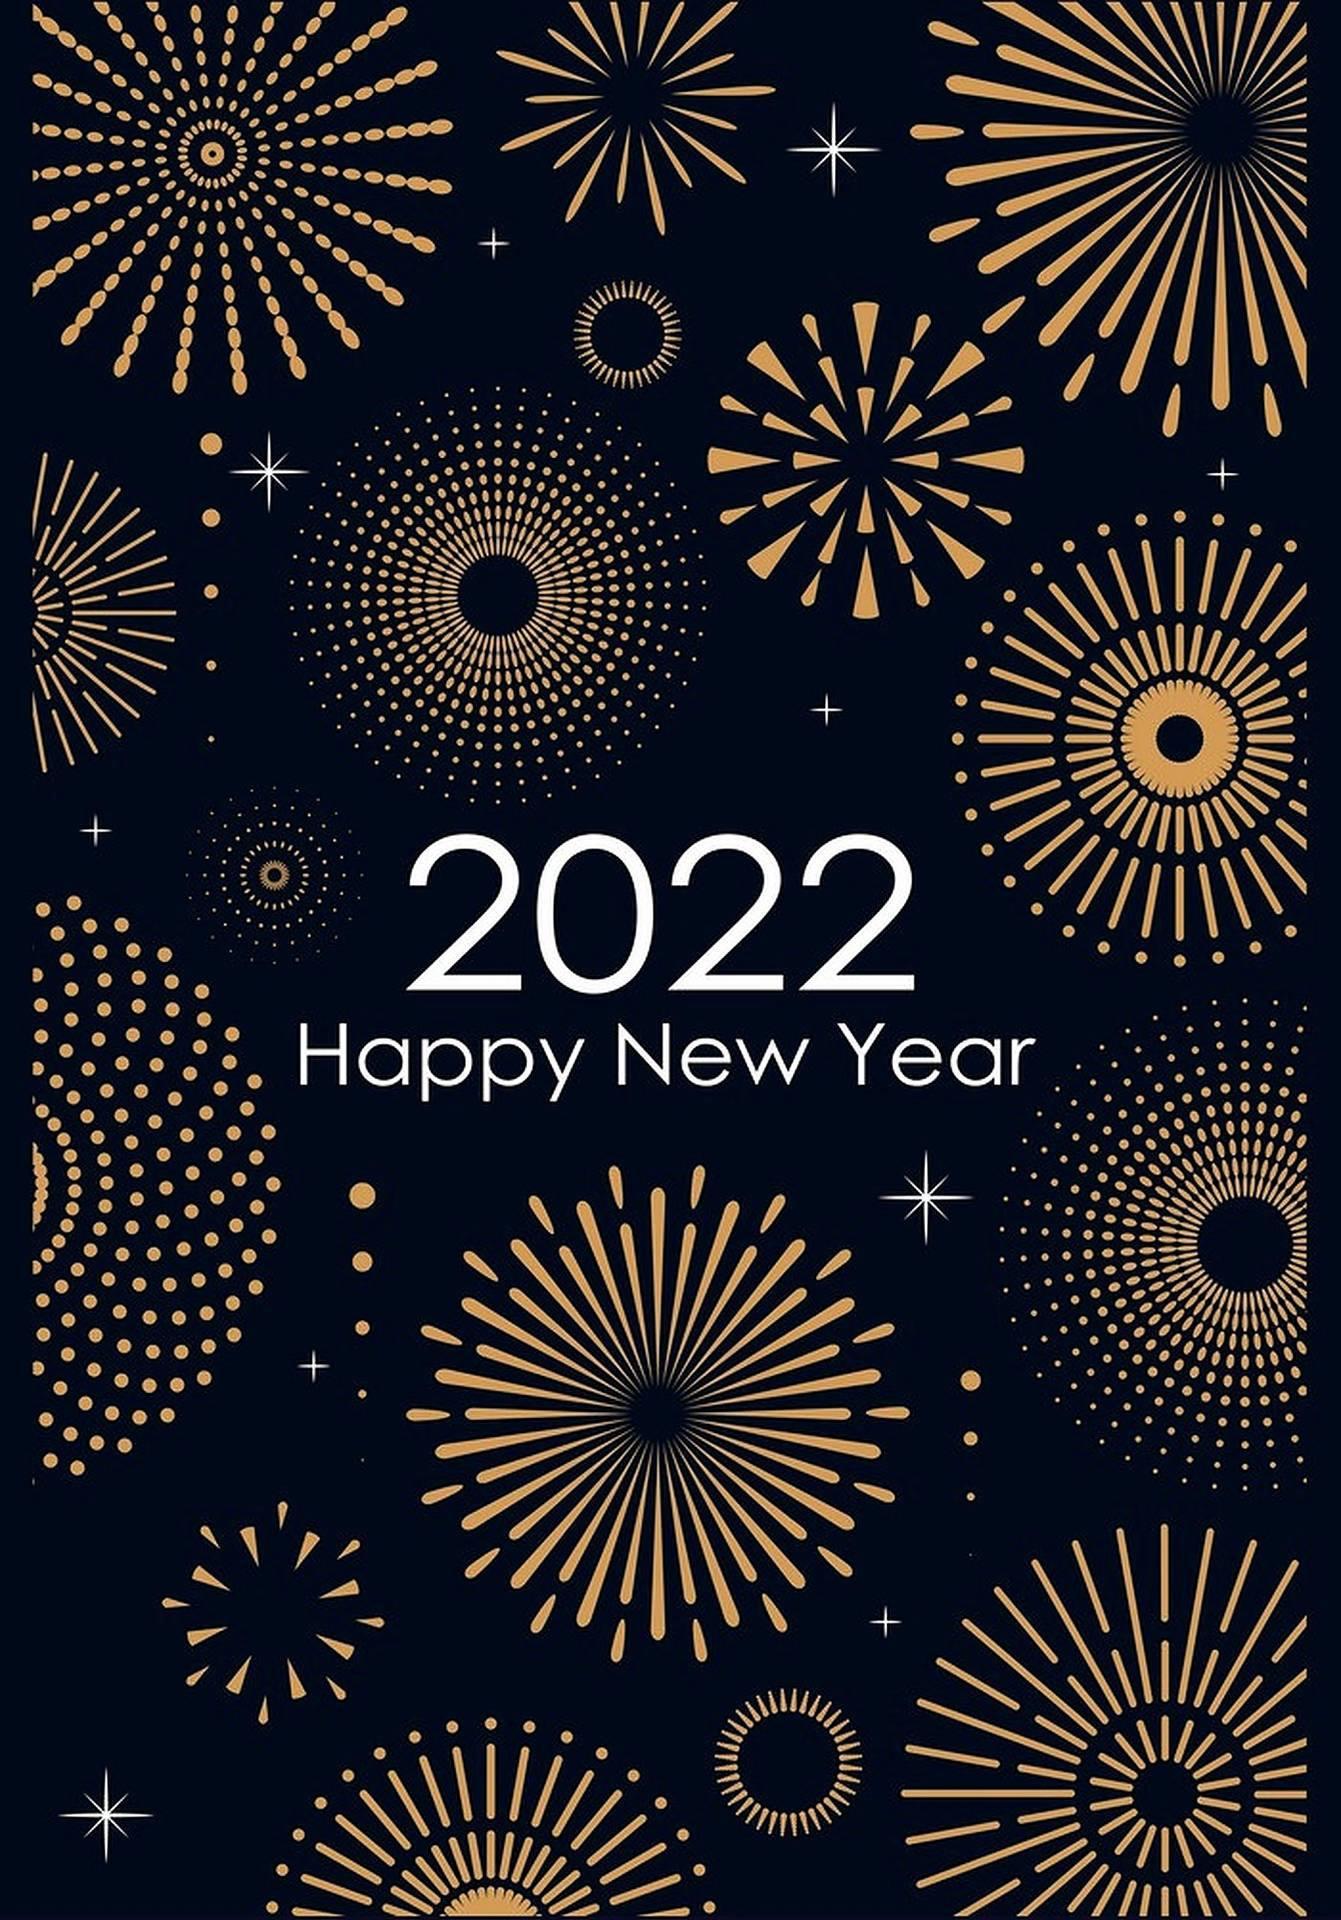 Welcoming New Year 2022 With A Bang! Background